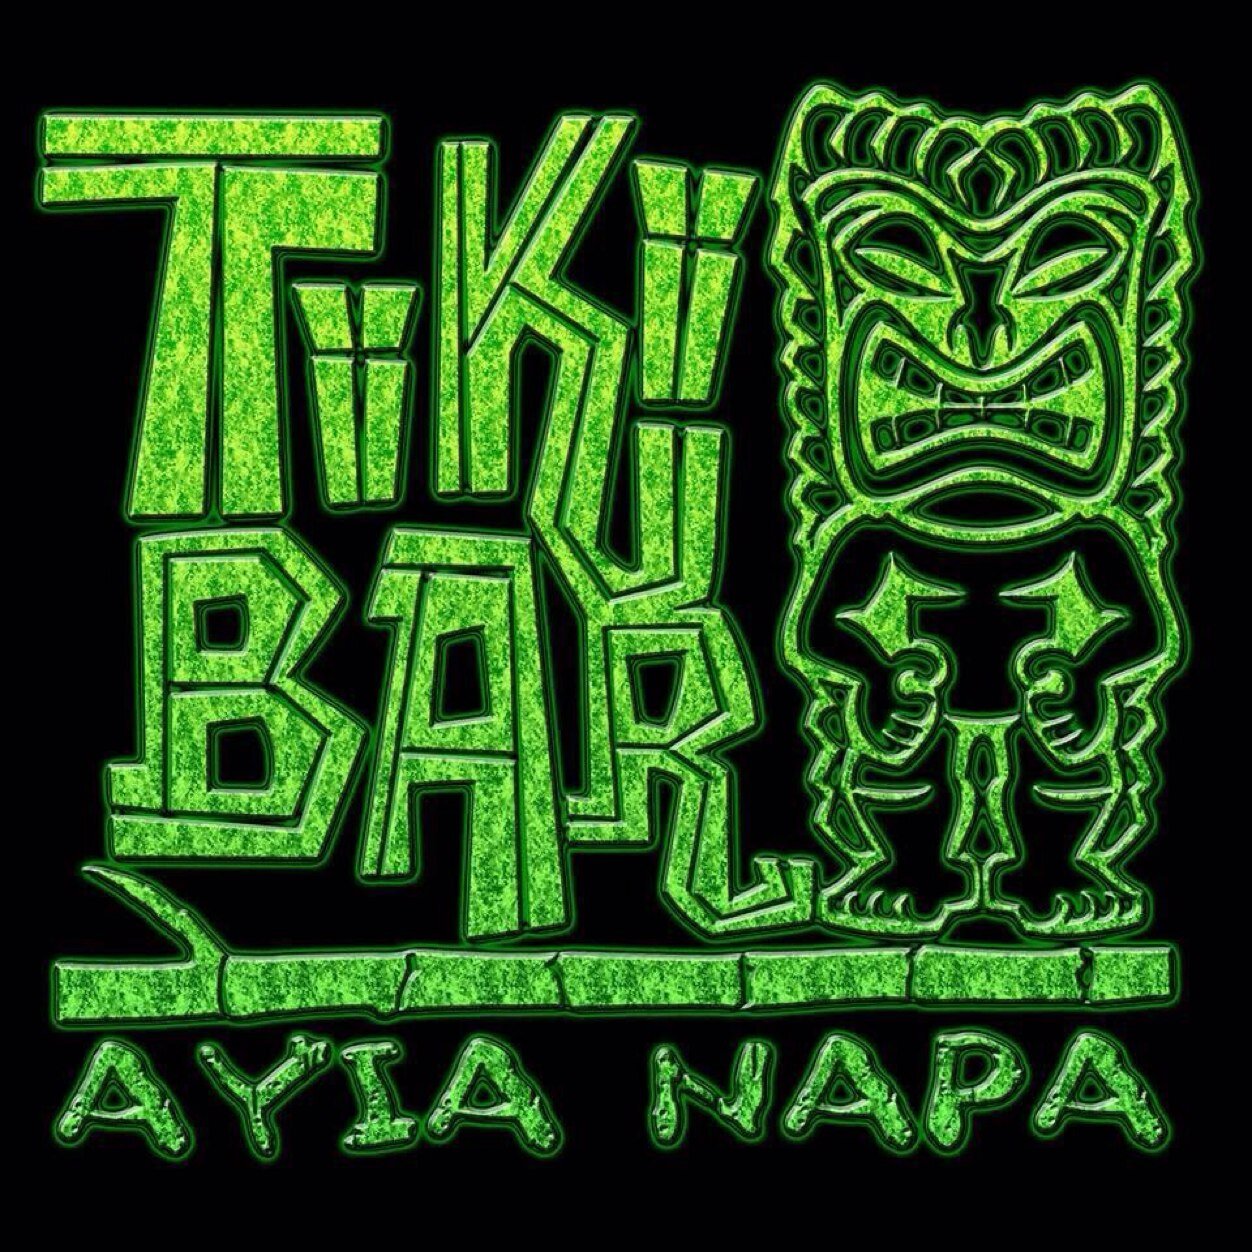 Ayia Napa's best and freshest bar with a new 2017 renovation! Get ready for all the best nights of your holiday! #ayianapa17 #napa17 #mayhem #messy #Juicy